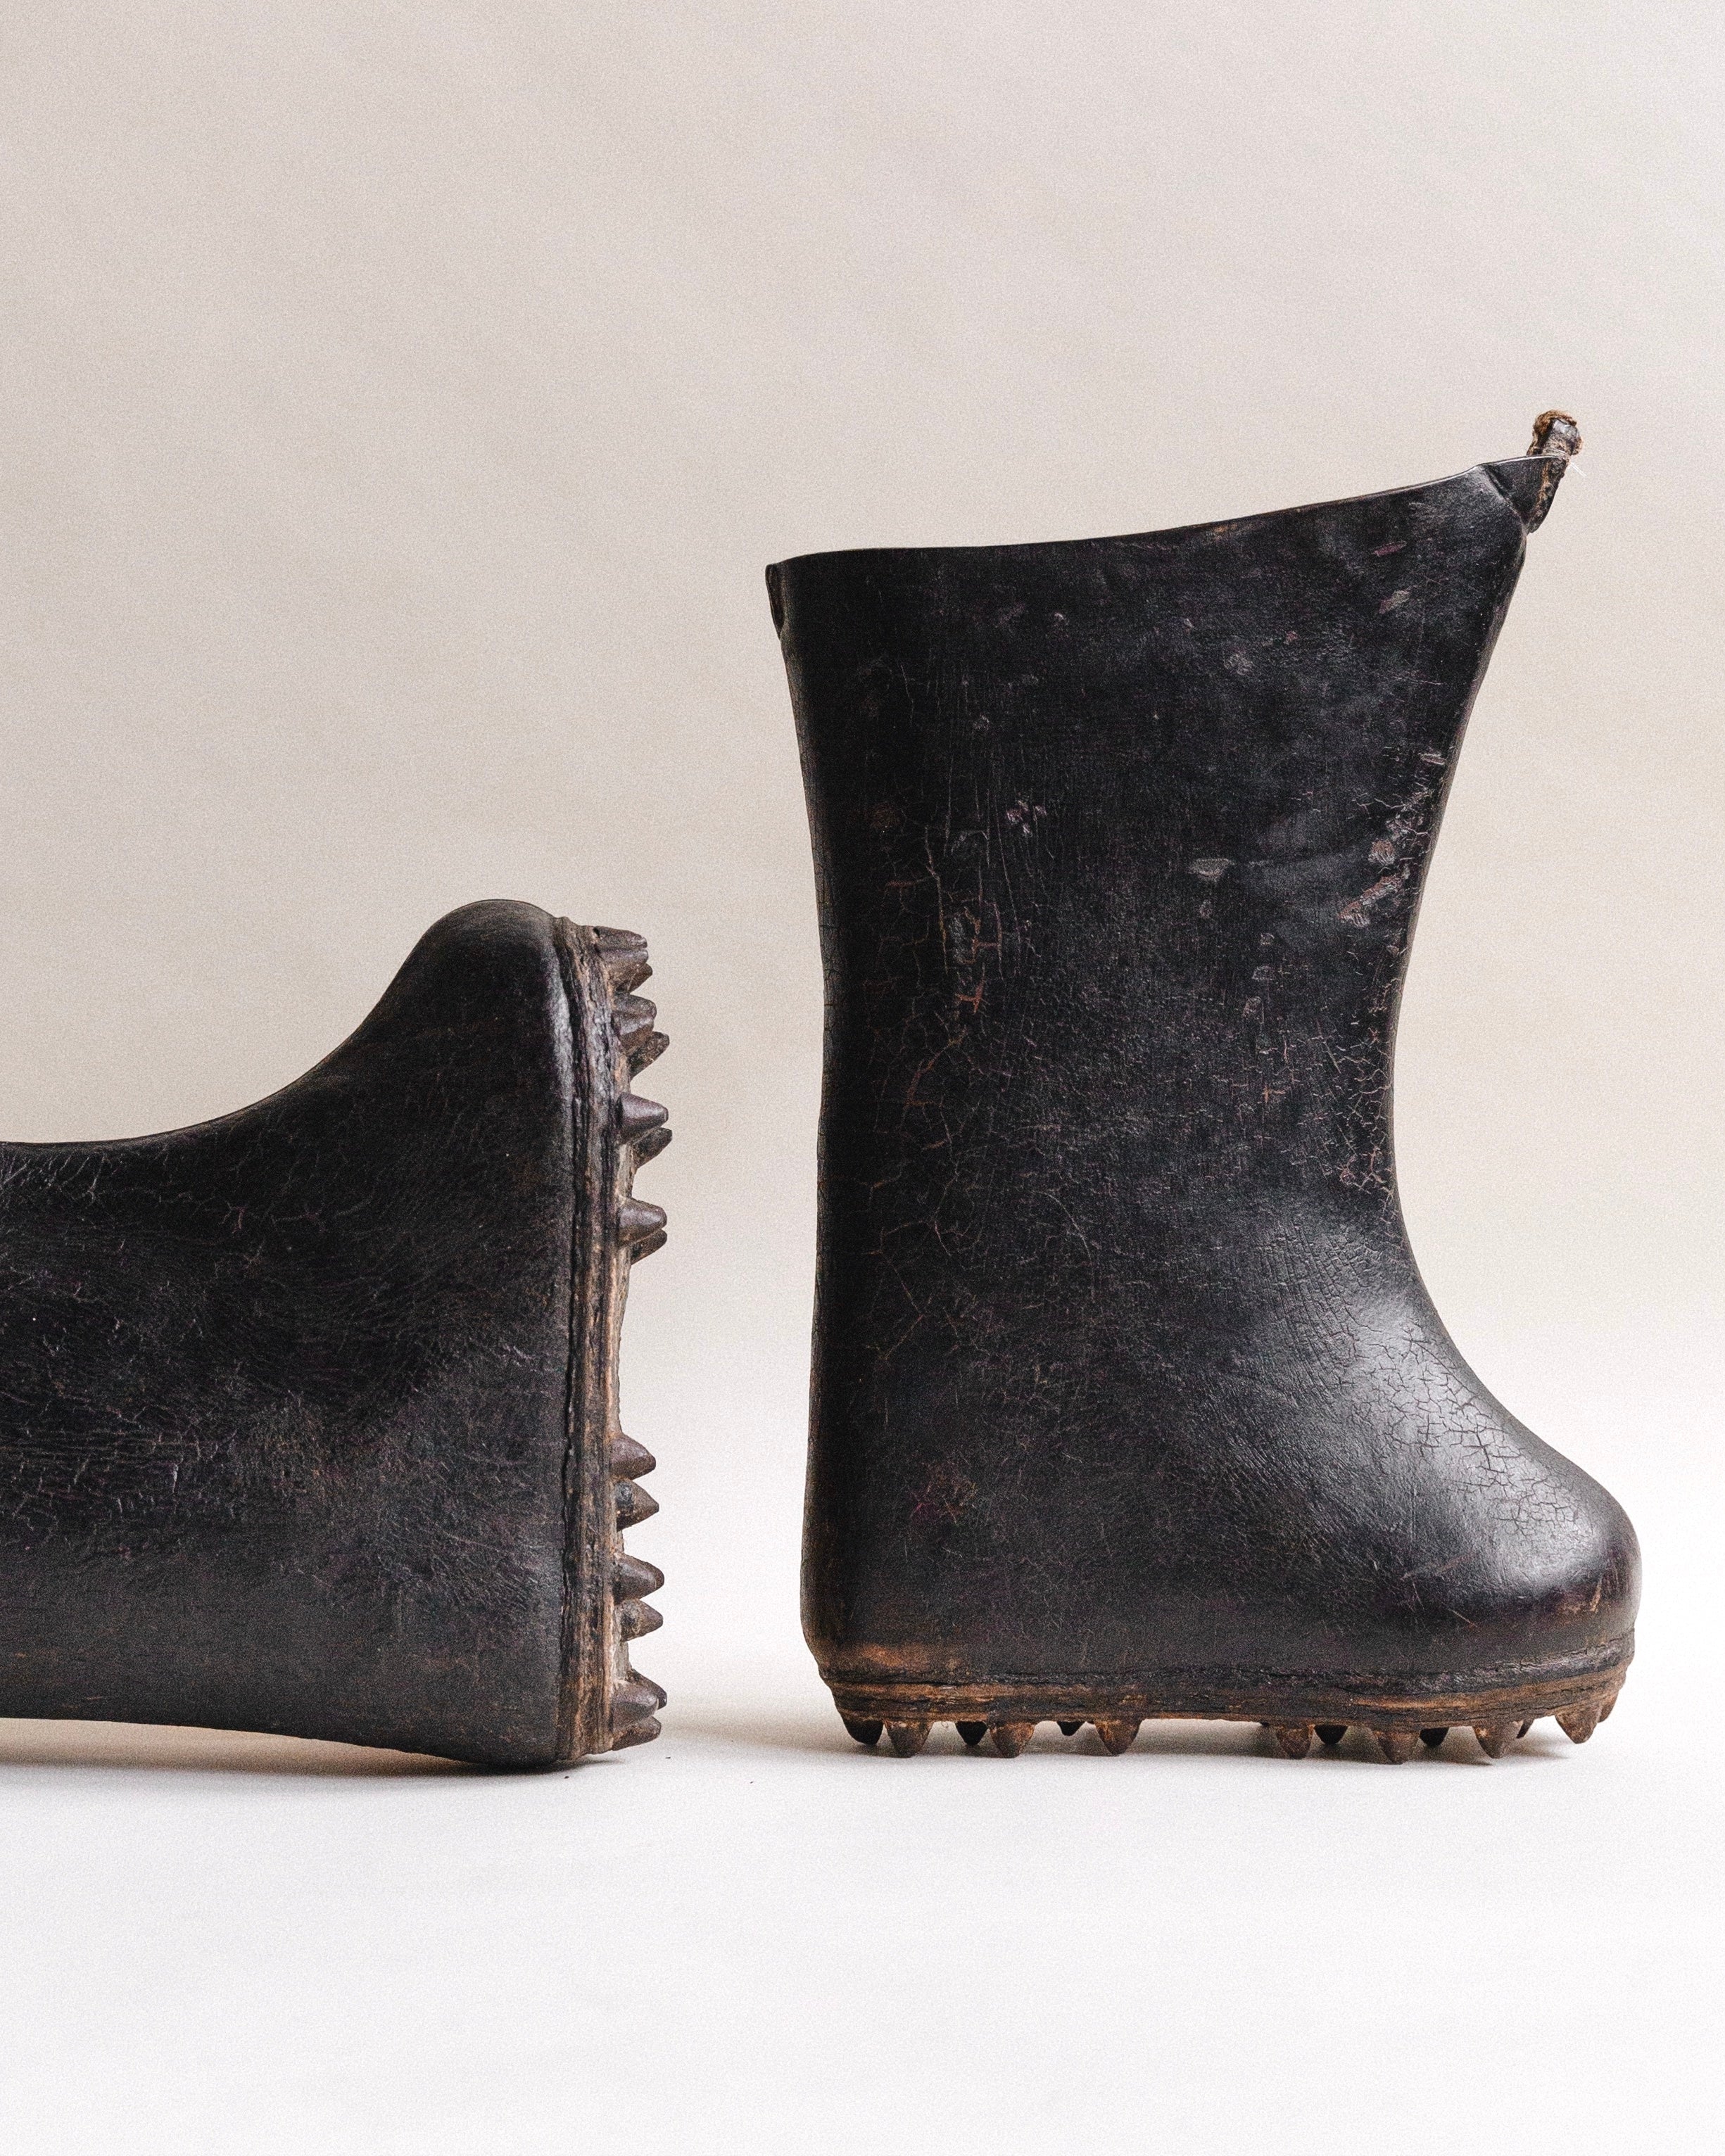 19th Century Fishermans Boots